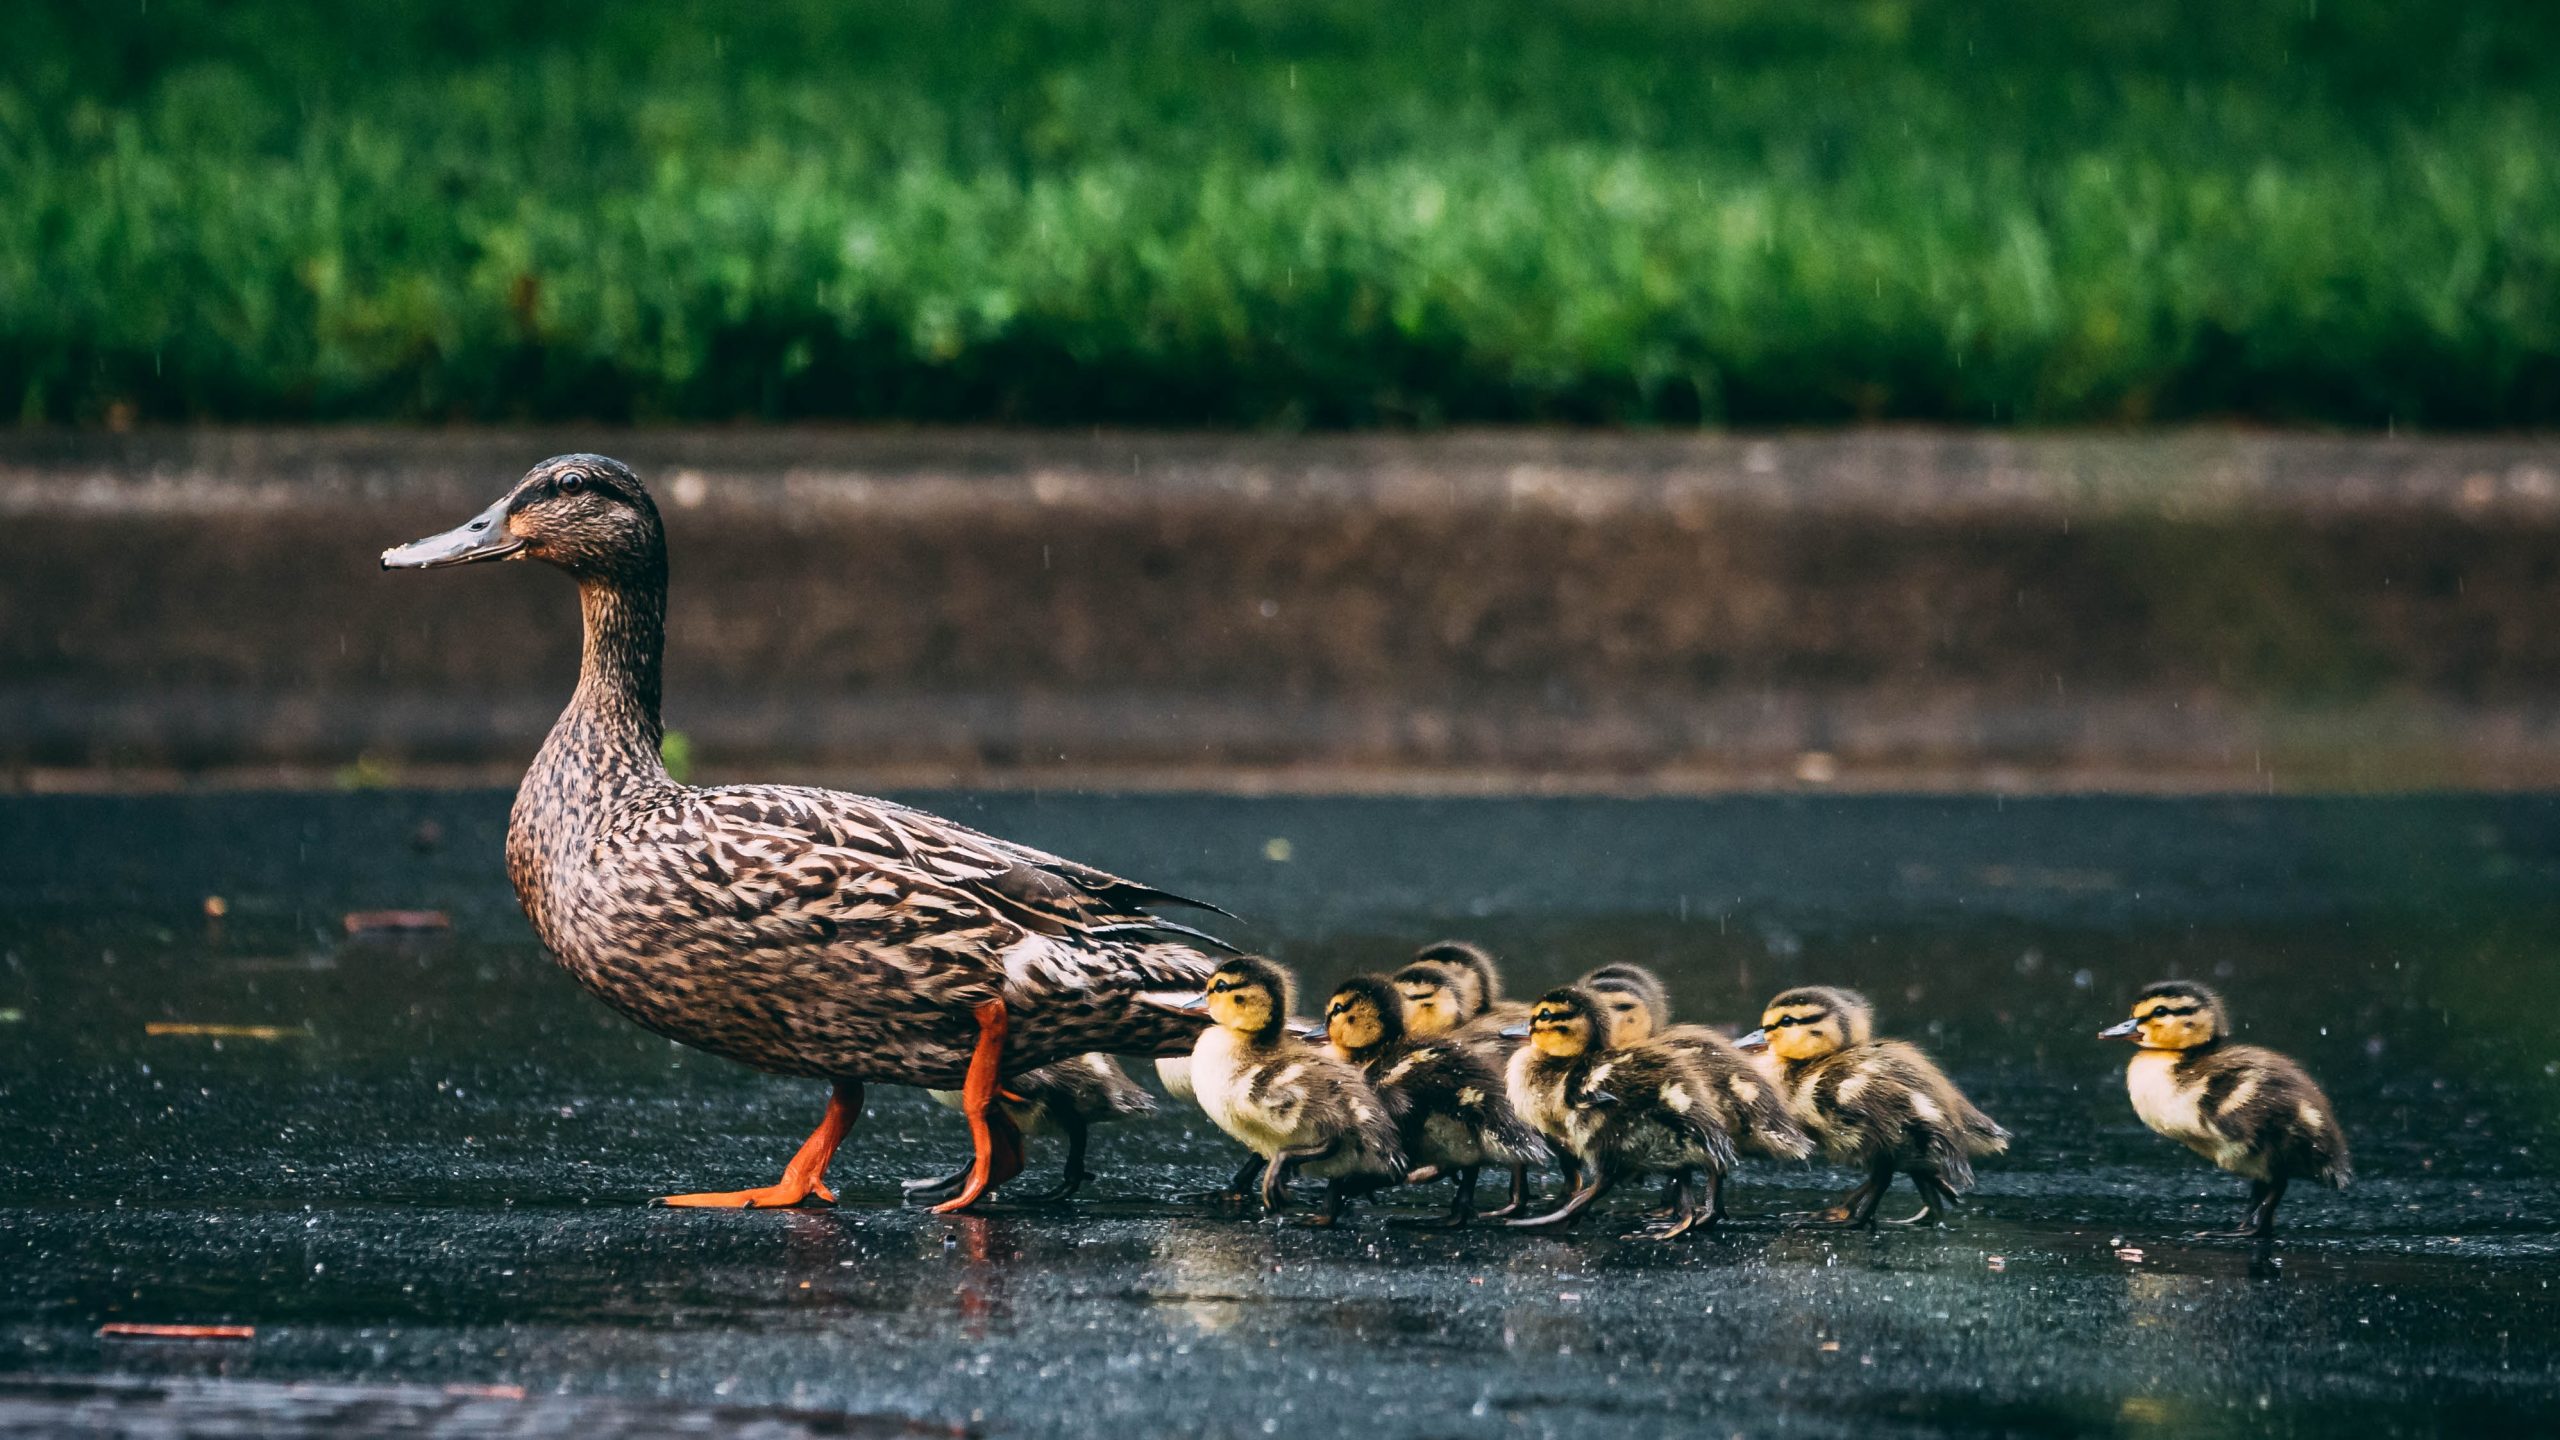 A mother duck leads her line of ducklings across a wet surface, with rain visibly falling around them. The vibrant green grass in the background contrasts with the dark ground, highlighting the ducks' journey. The ducklings follow closely behind their mother, showcasing the natural behavior of these waterfowl in a serene, yet dynamic, moment.